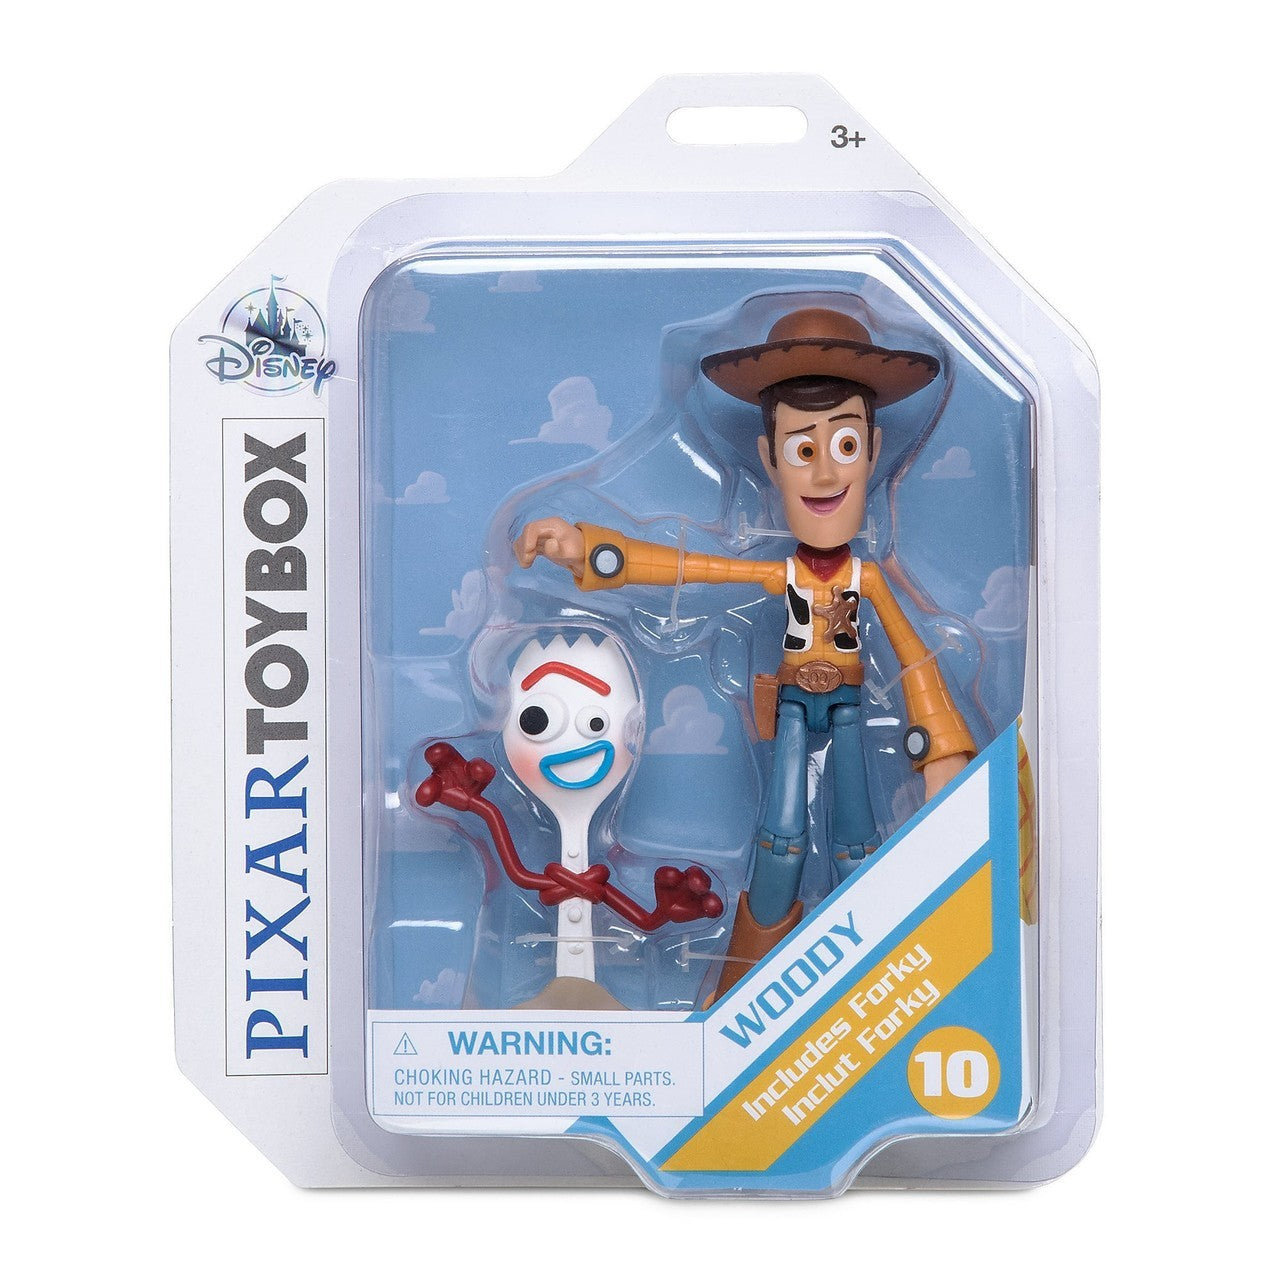 Woody Action Figure - Toy Story 4 - PIXAR Toybox